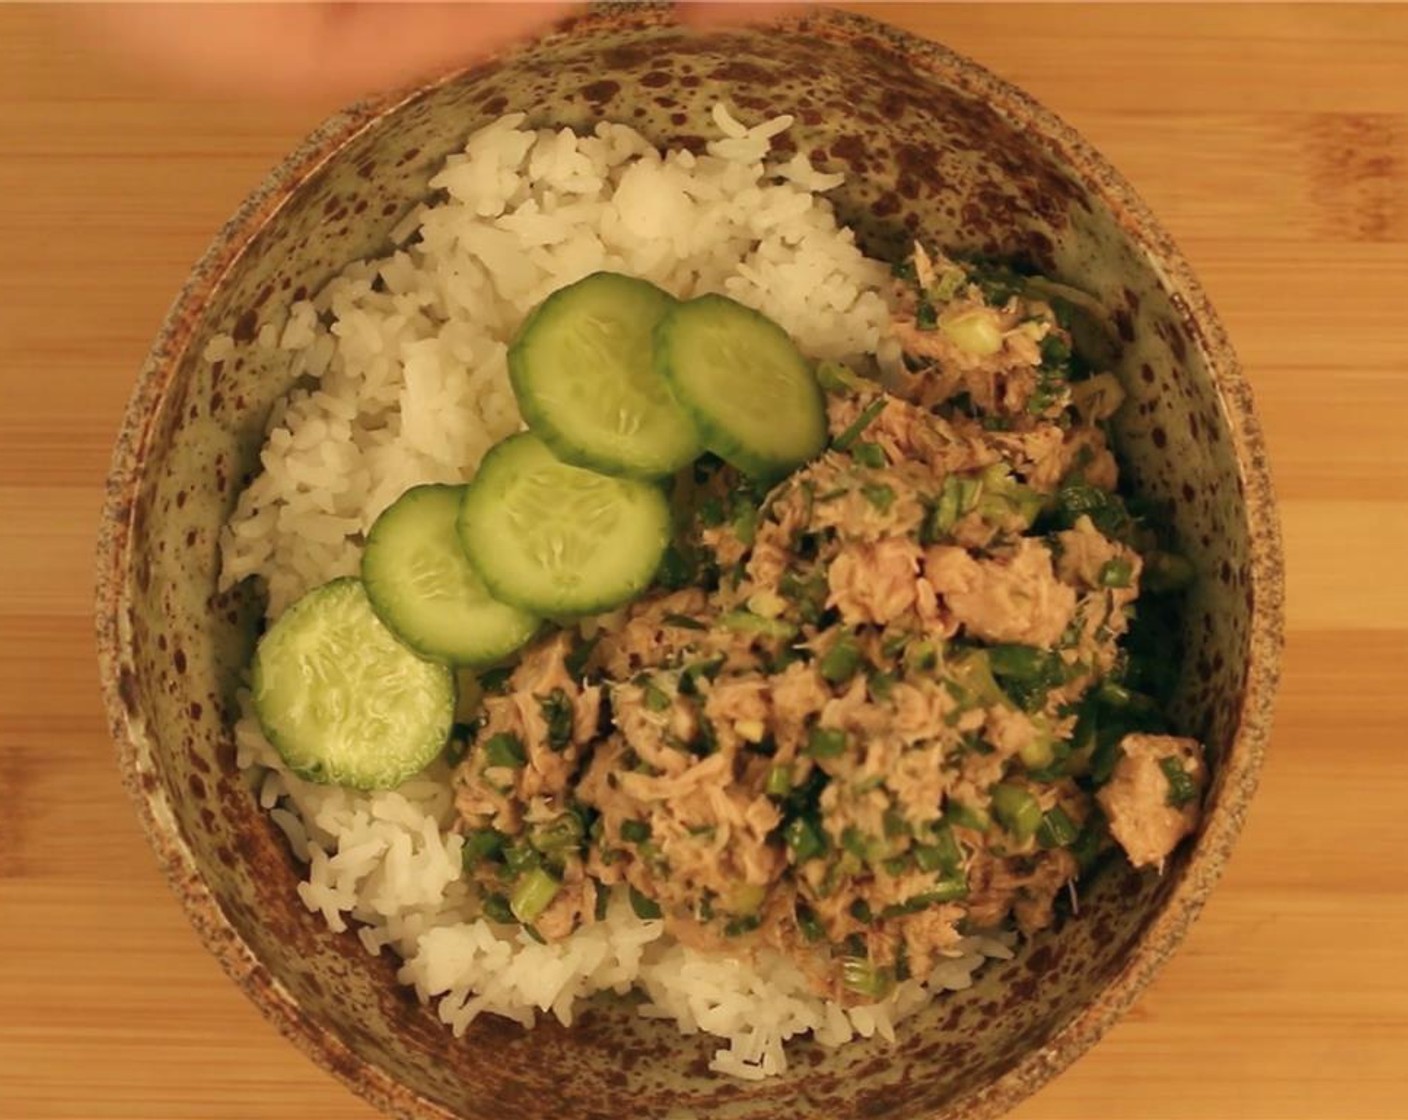 step 5 Top rice with tuna mixture and add Cucumbers (3).